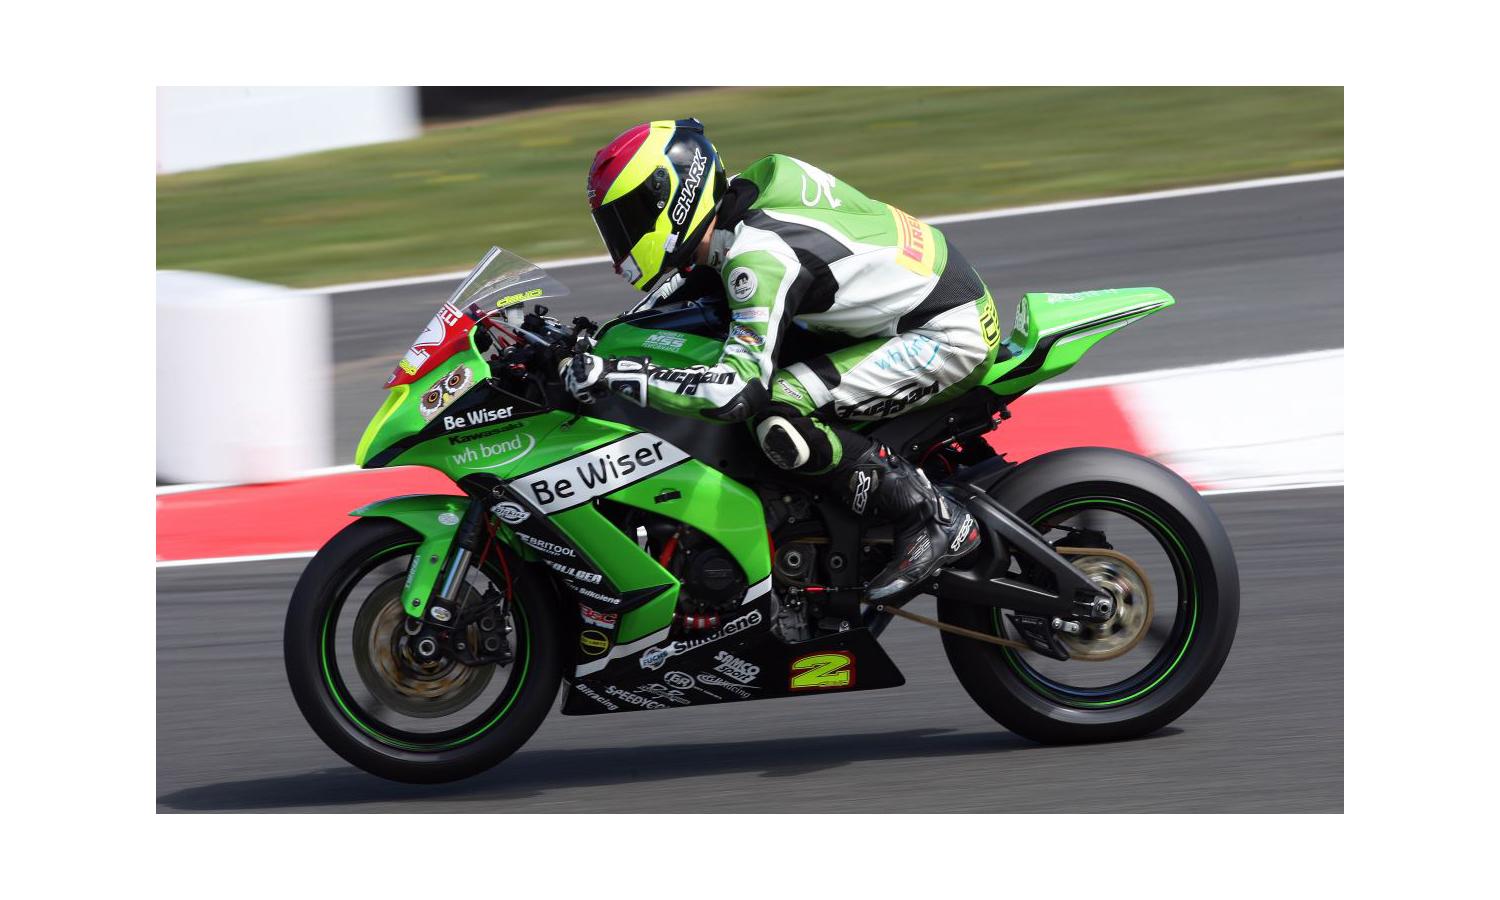 Dickies moves into Superbikes with Be Wiser Kawasaki